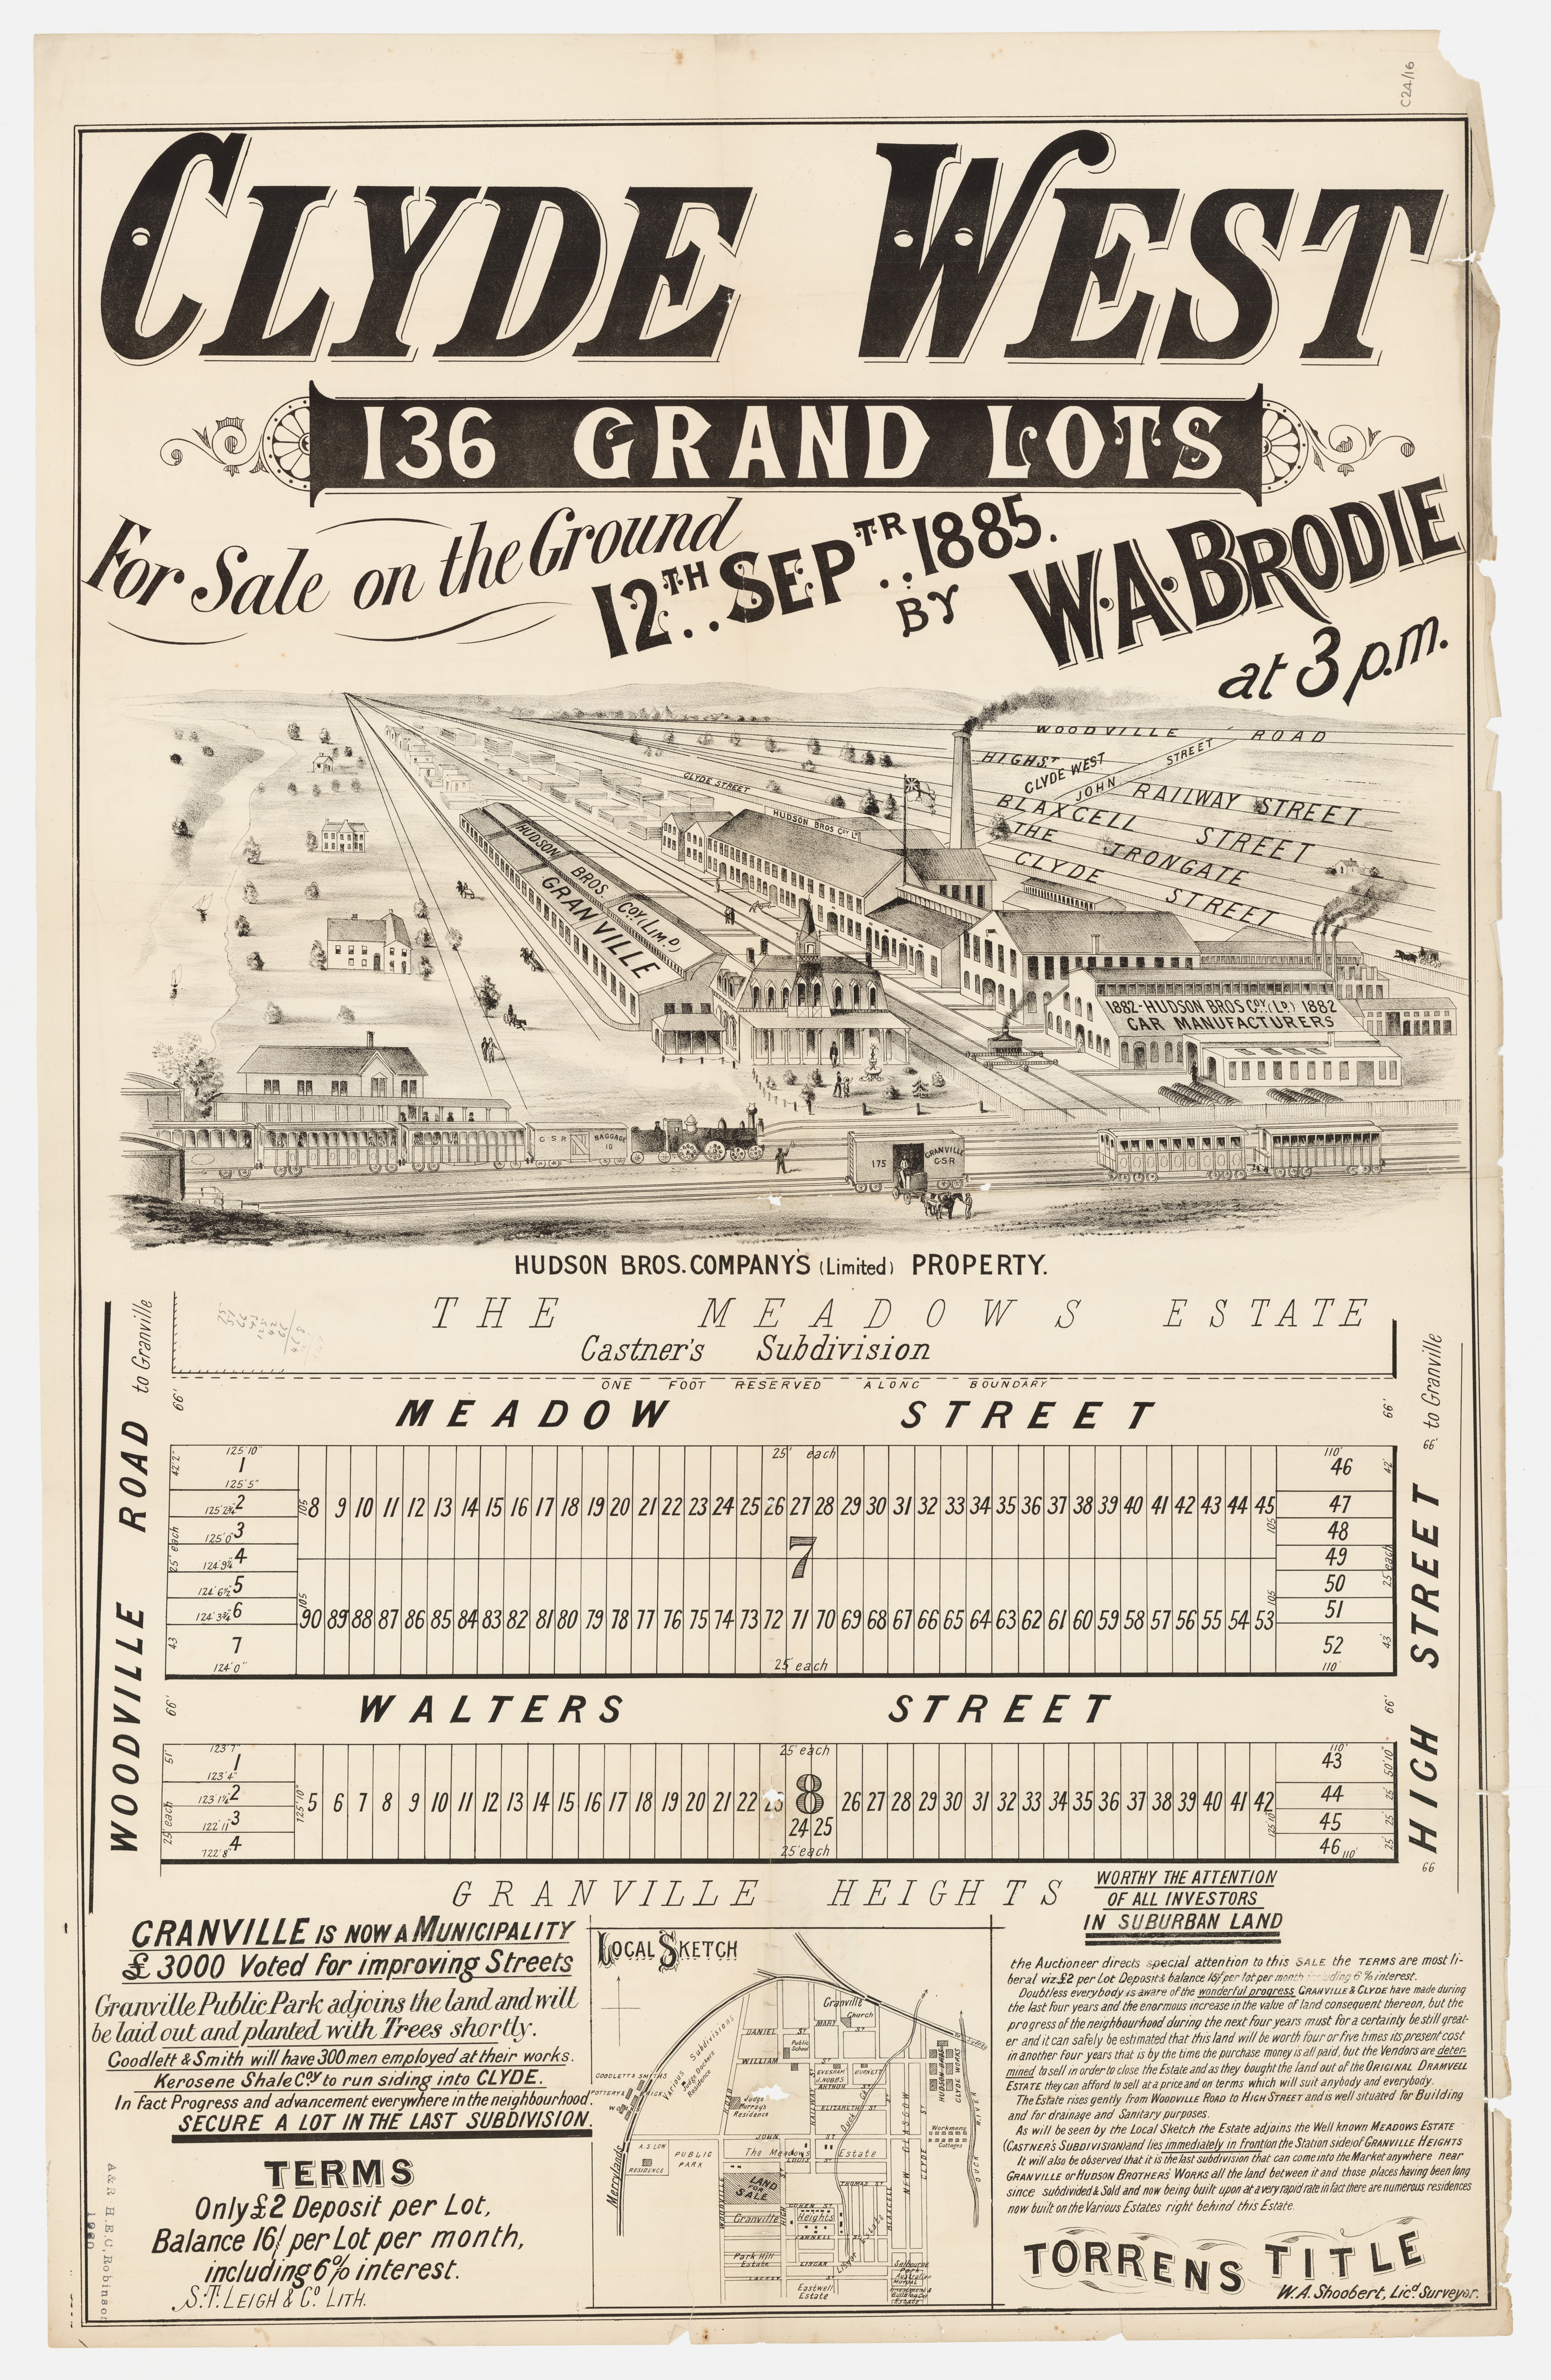 Subdivision Plan: 016 - SP/C24/16 - Clyde West 136 Grand Lots - Woodville Rd, Walters St, High St, Meadow St, 1885